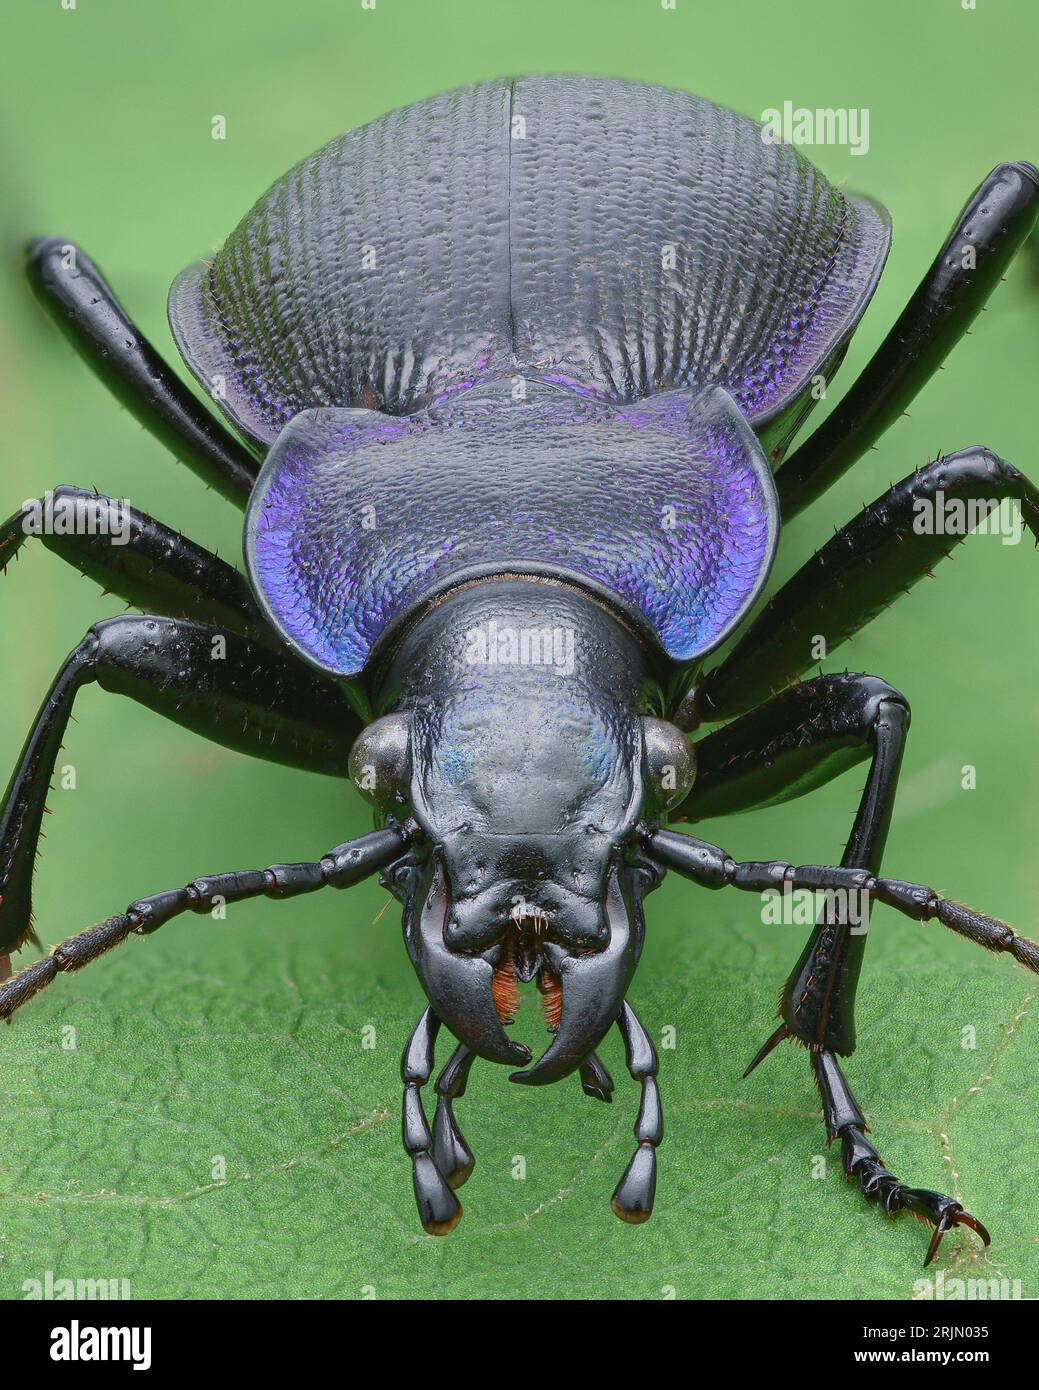 Portrait of a black and violet ground beetle standing on a green leaf (Rough Violet Ground Beetle, Carabus problematicus) Stock Photo